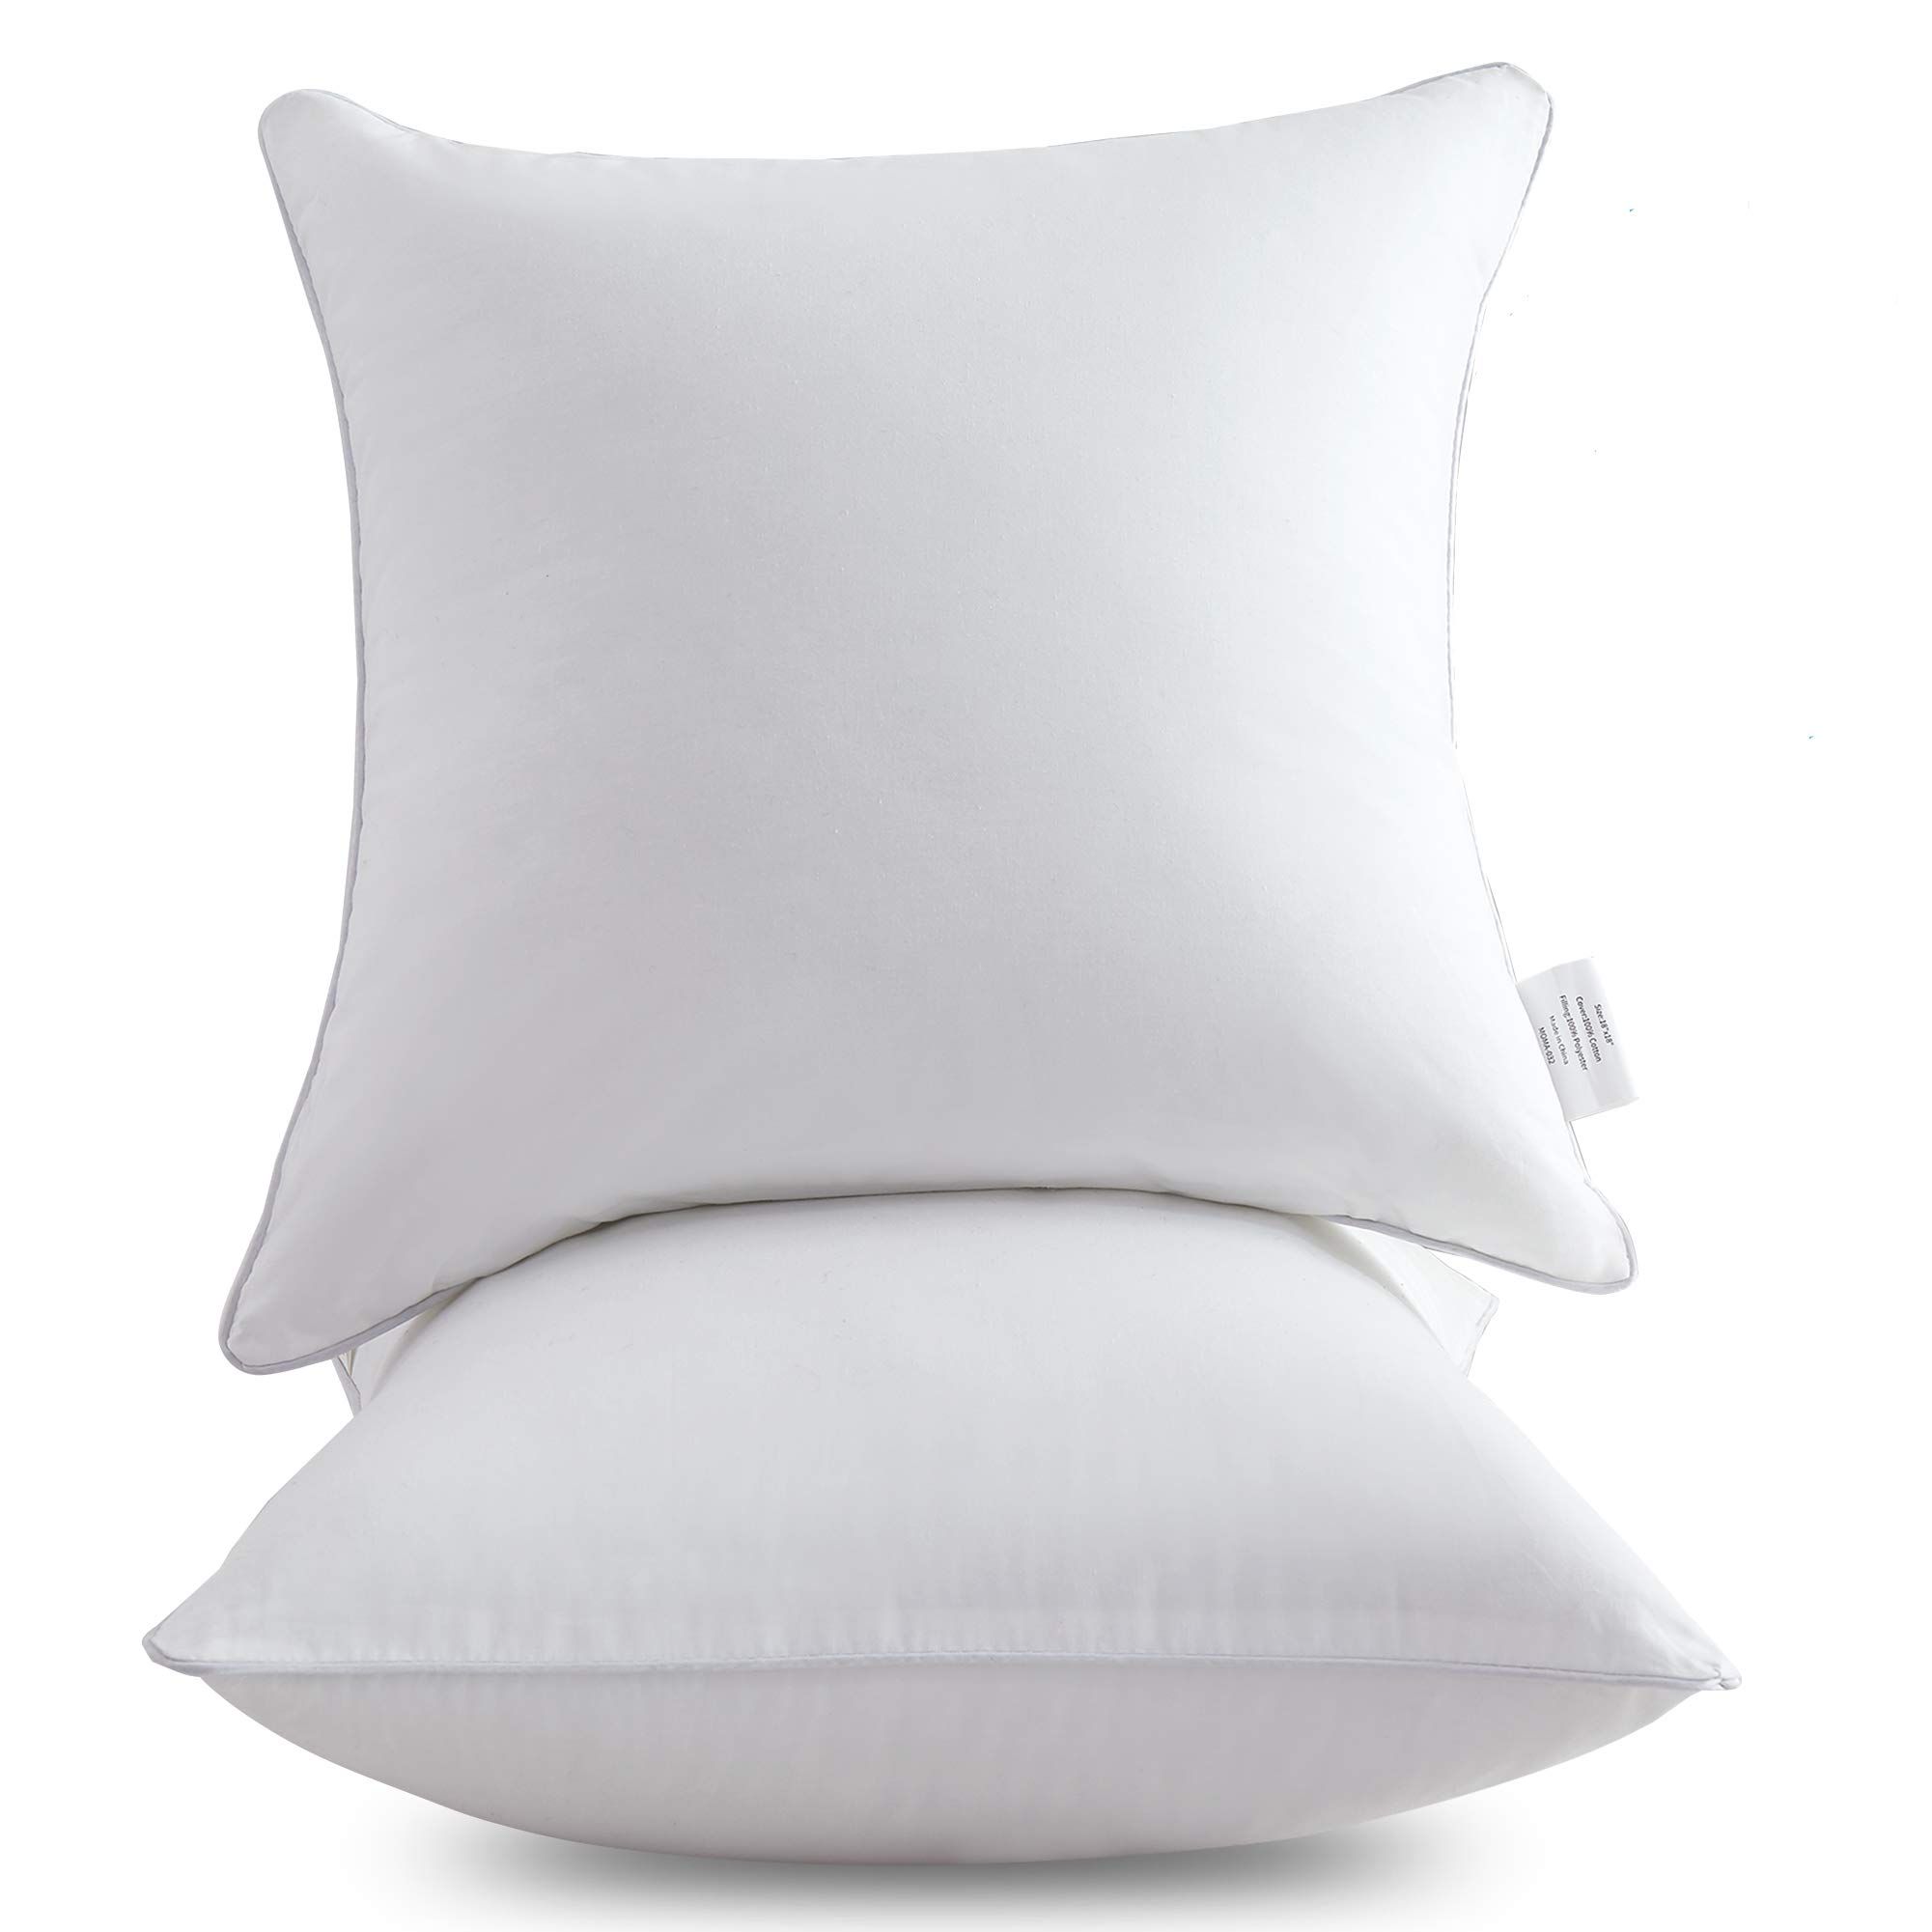 Oubonun 20 x 20 Pillow Inserts (Set of 2) - Throw Pillow Inserts with 100% Cotton Cover - 20 Inch Sq | Amazon (US)